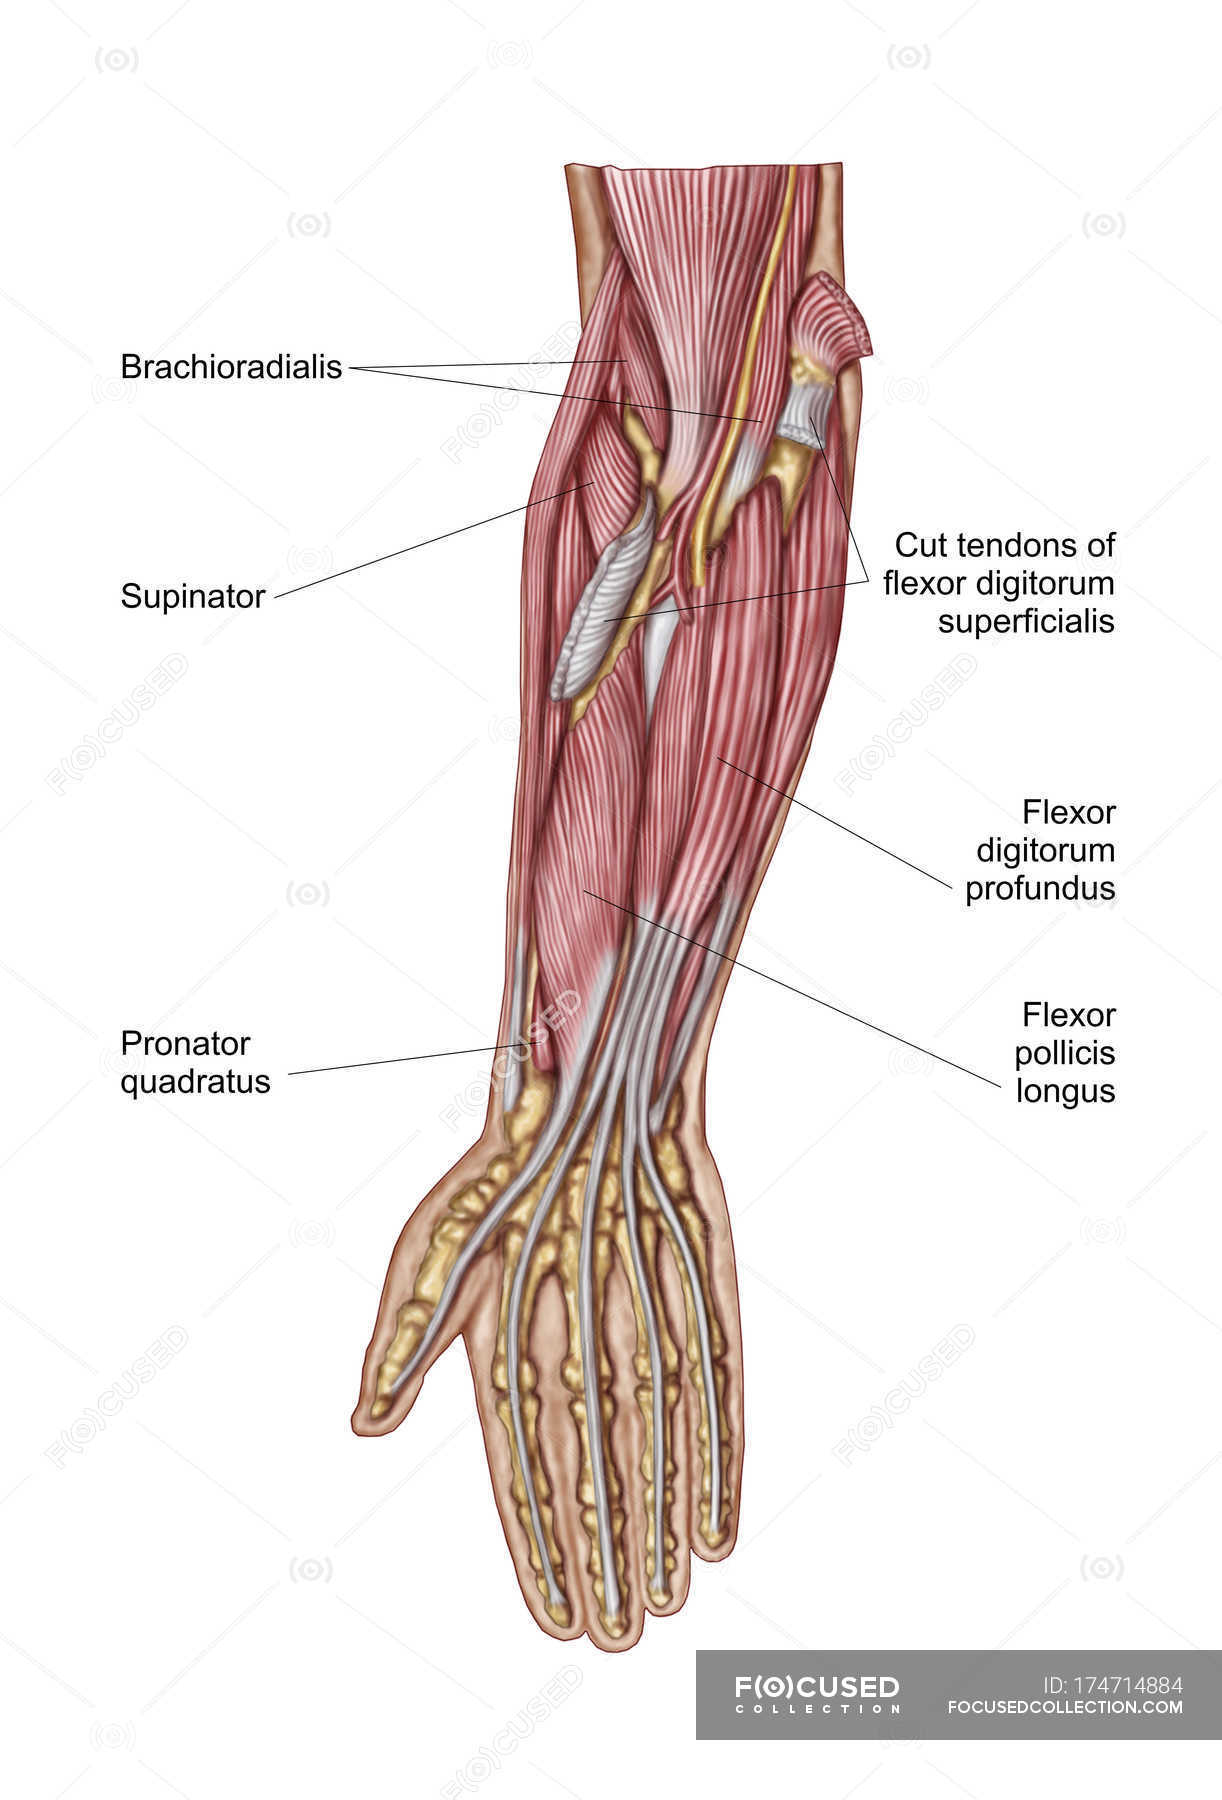 Anatomy of human forearm muscles with labels — Stock Photo | #174714884